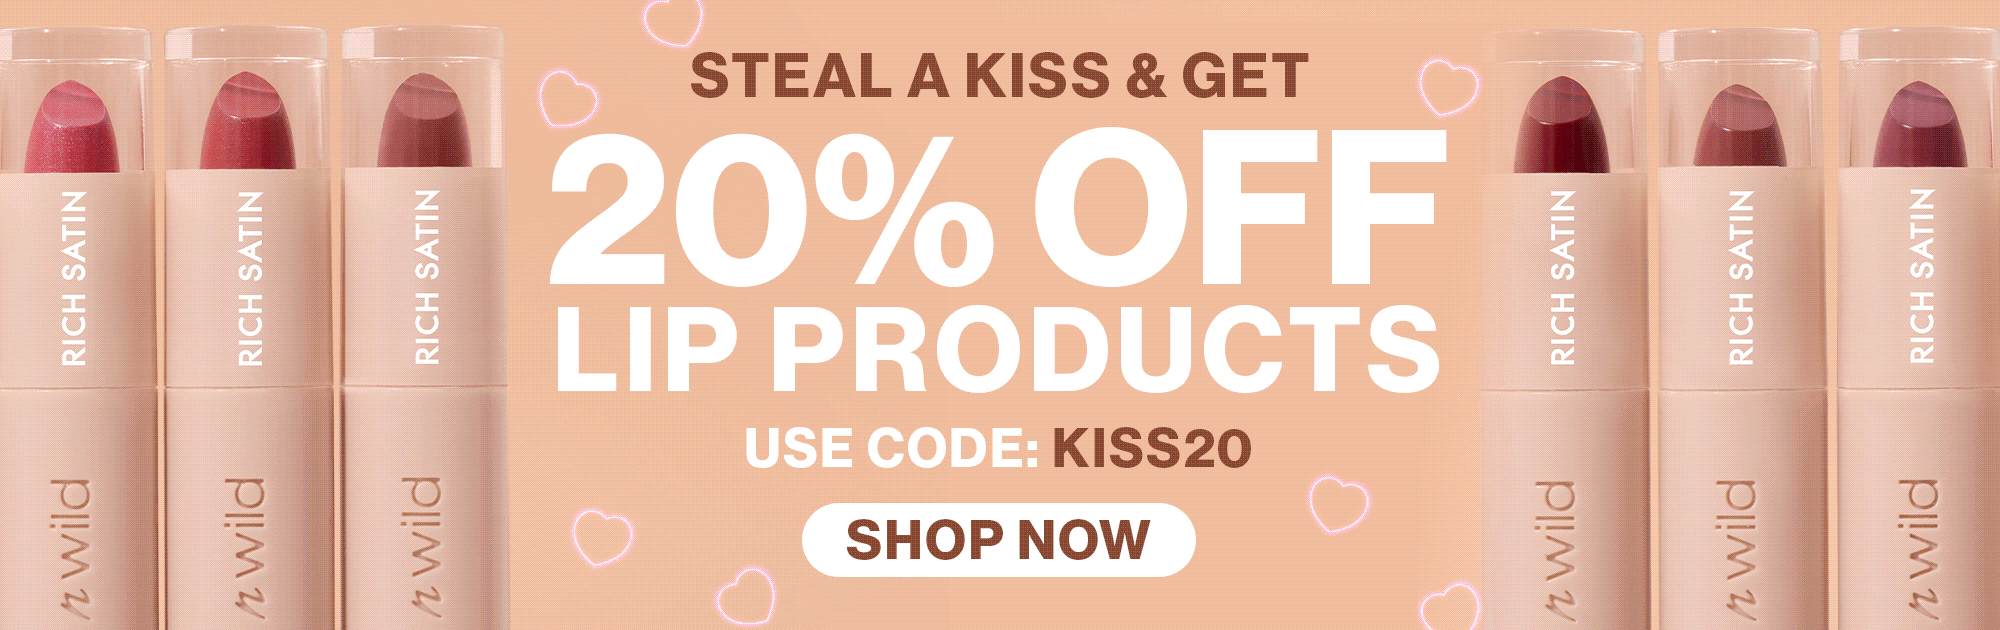 20% OFF ALL LIP PRODUCTS

CODE: KISS20

Disclaimer: Use Code: KISS20 during checkout to receive 20% off Lips category while supplies last! Promotional price reflected at checkout. Excludes Sale, Bundles, and Collection Boxes. Please note that this offer cannot be combined with any other offer and may not be used towards prior purchases, taxes, or shipping fees. wet n wild reserves the right to end or modify this promotion at any time. The offer expires on 5/23/2024 at 11:59 pm PST.